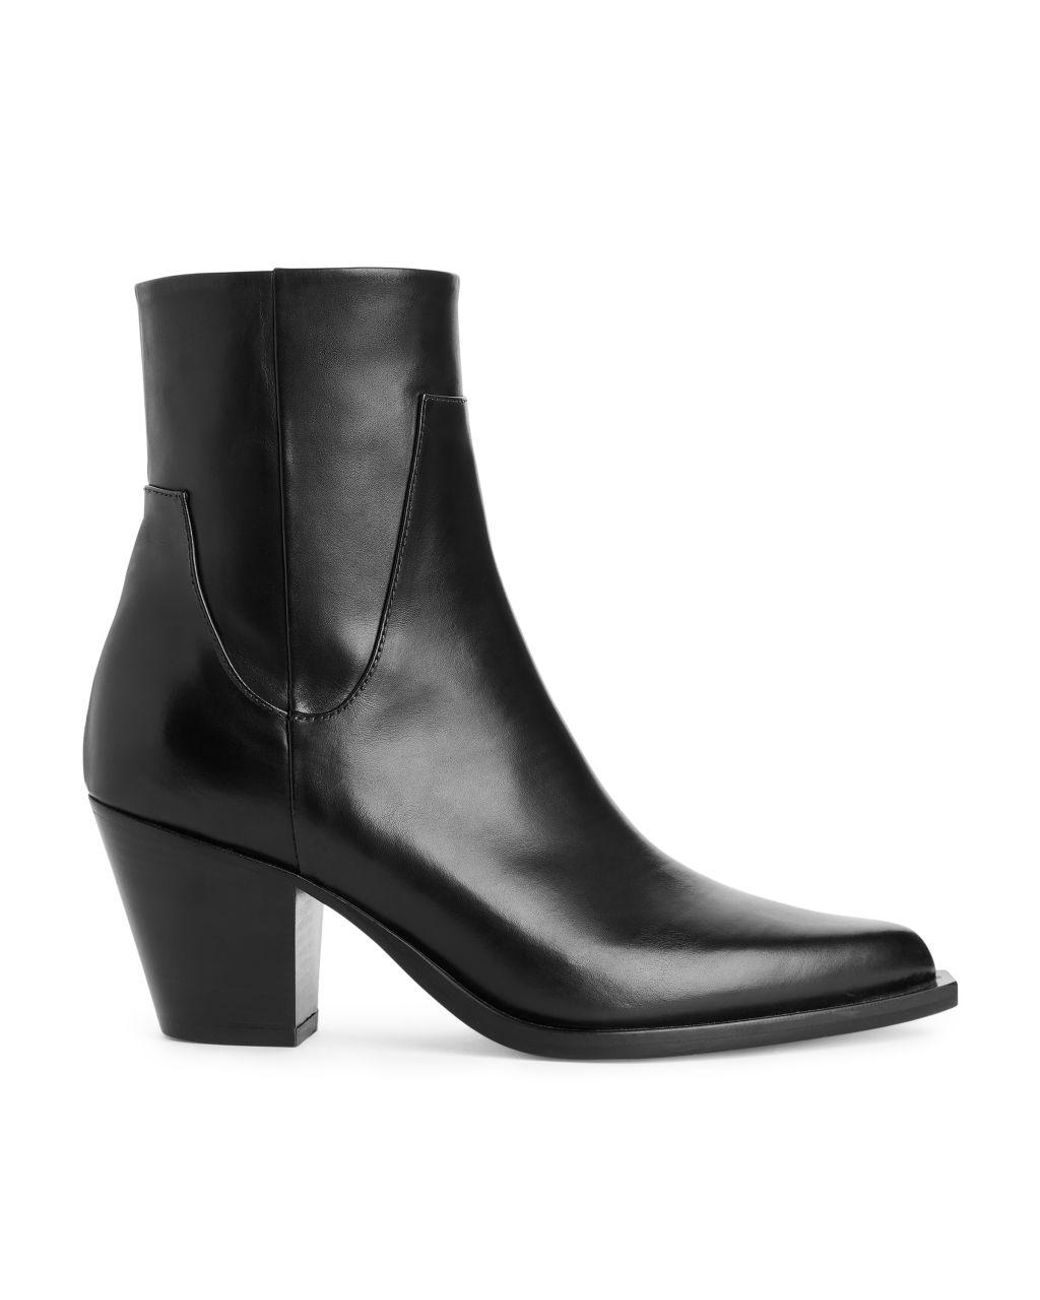 ARKET Leather Ankle Boots in Black - Lyst